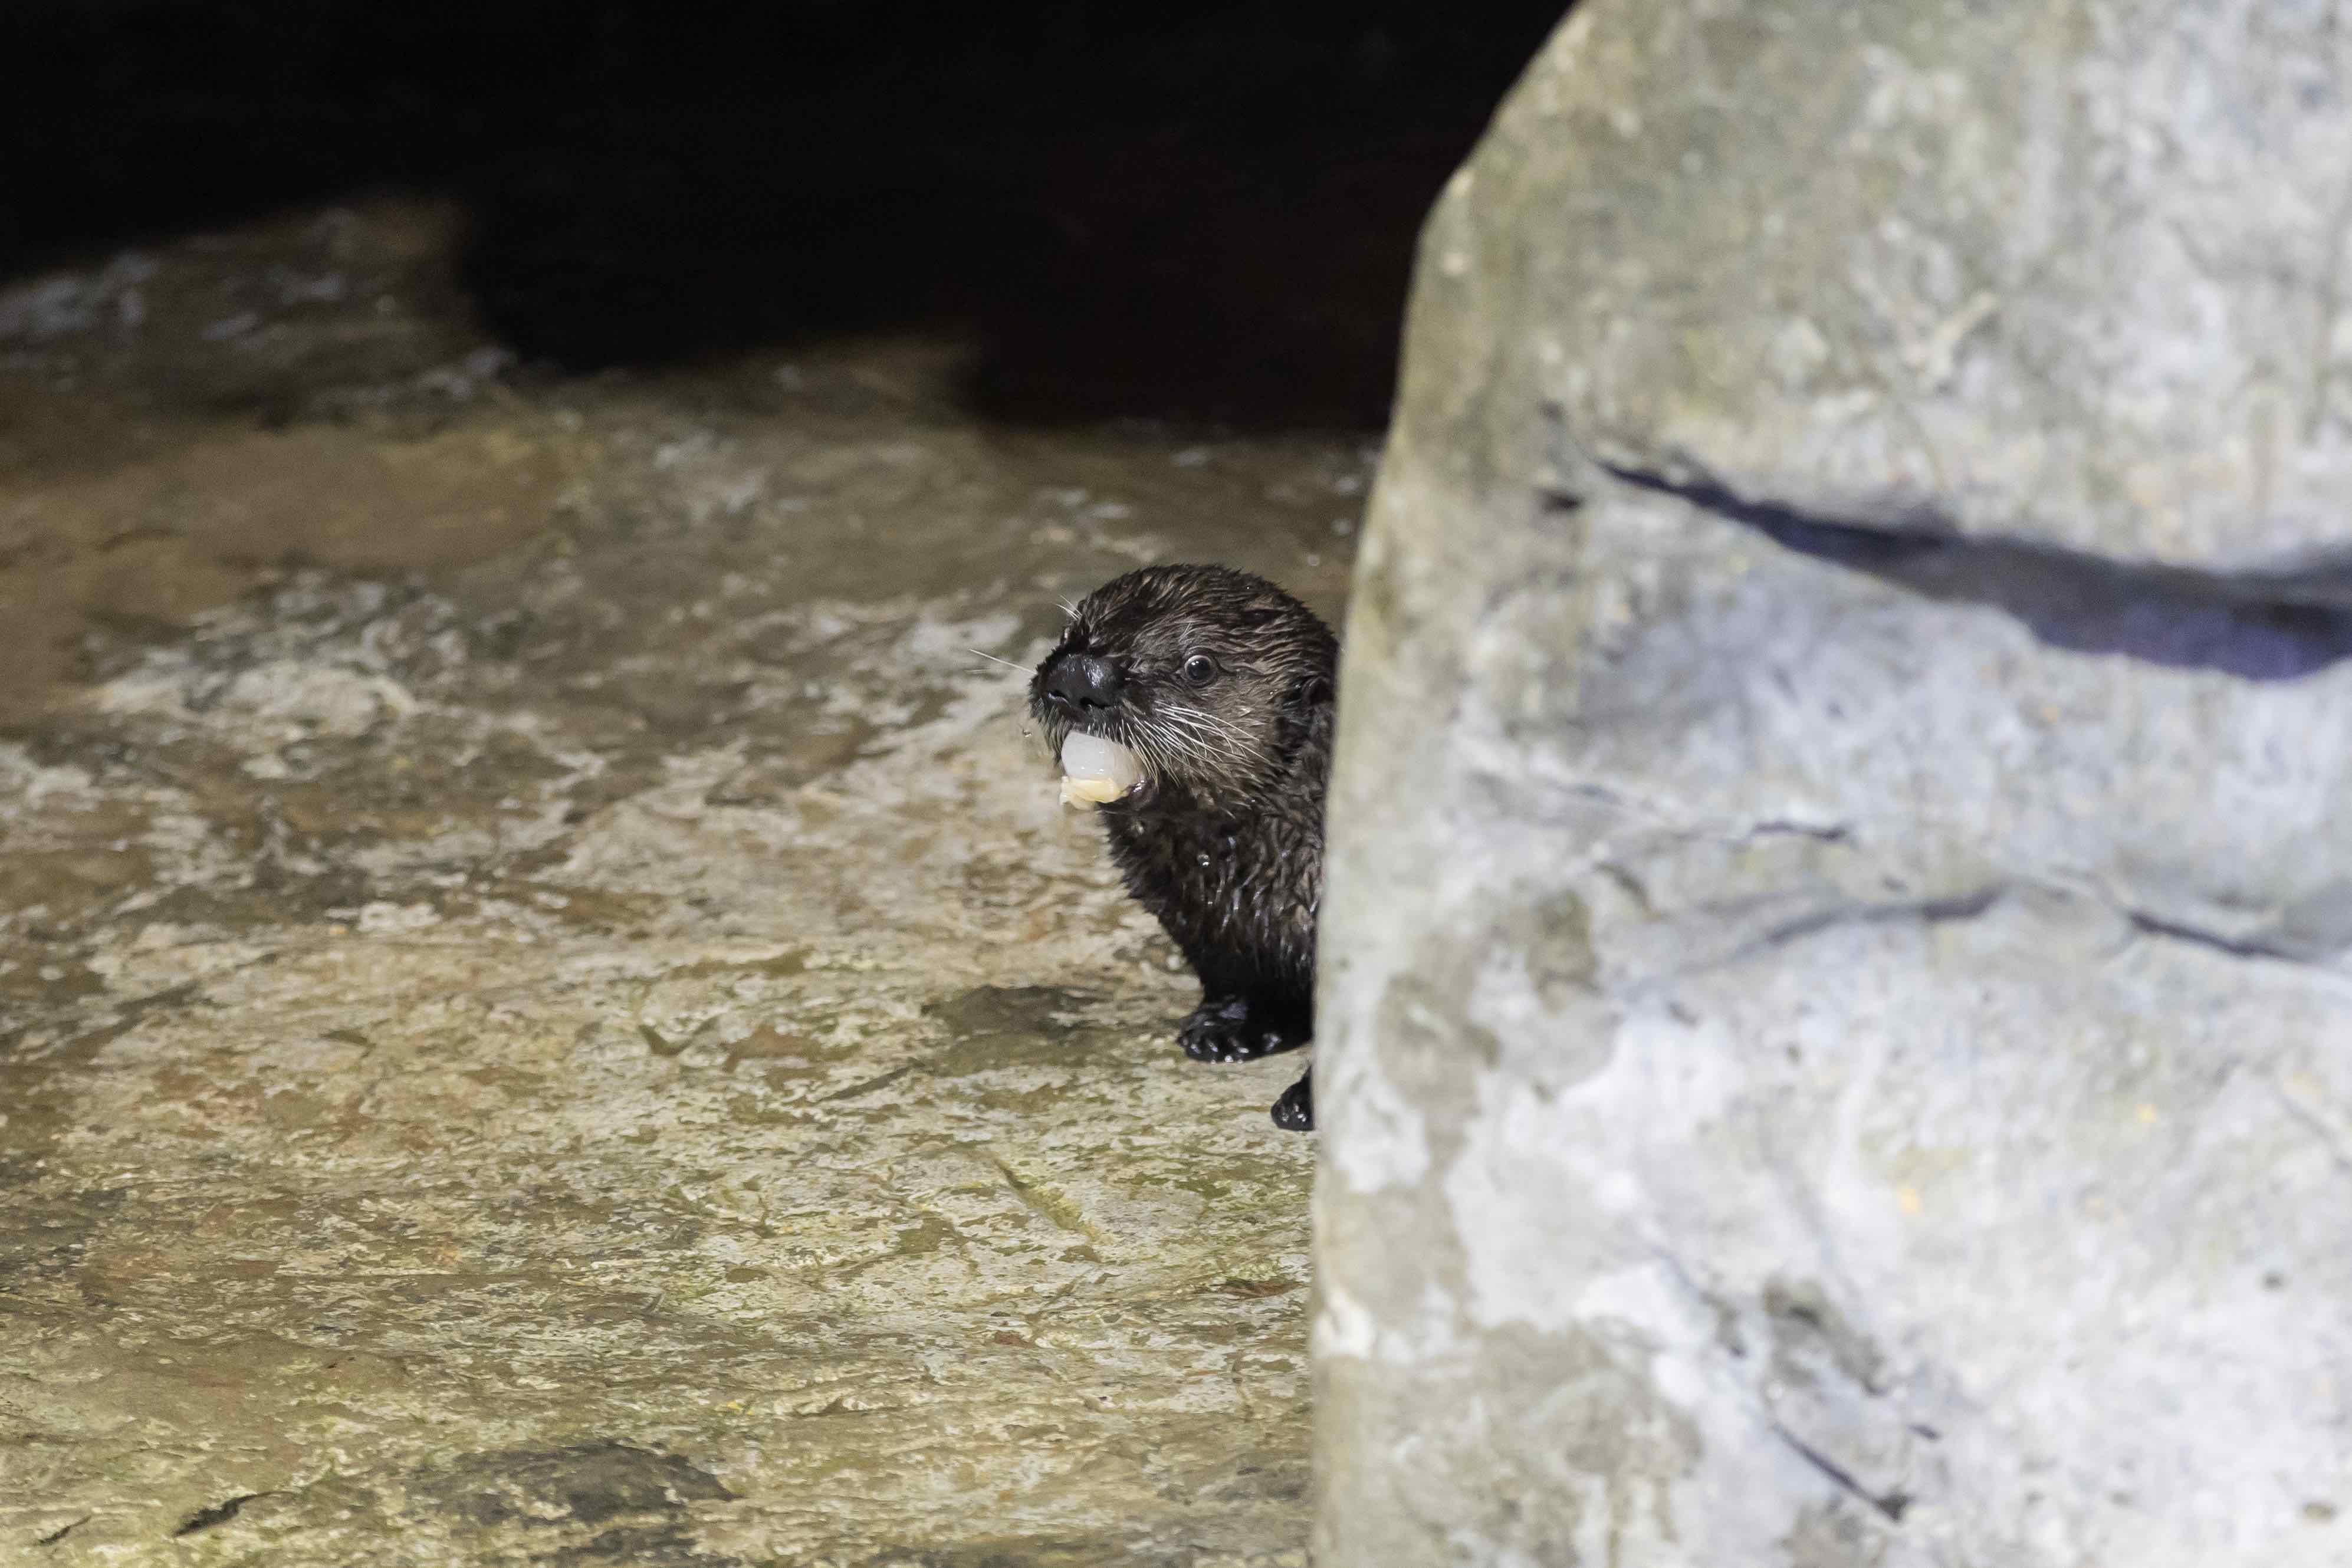 Peek-a-boo! Shedd’s otter pup has been acclimating behind the scenes but is ready to meet the public. (Brenna Hernandez / Shedd Aquarium)